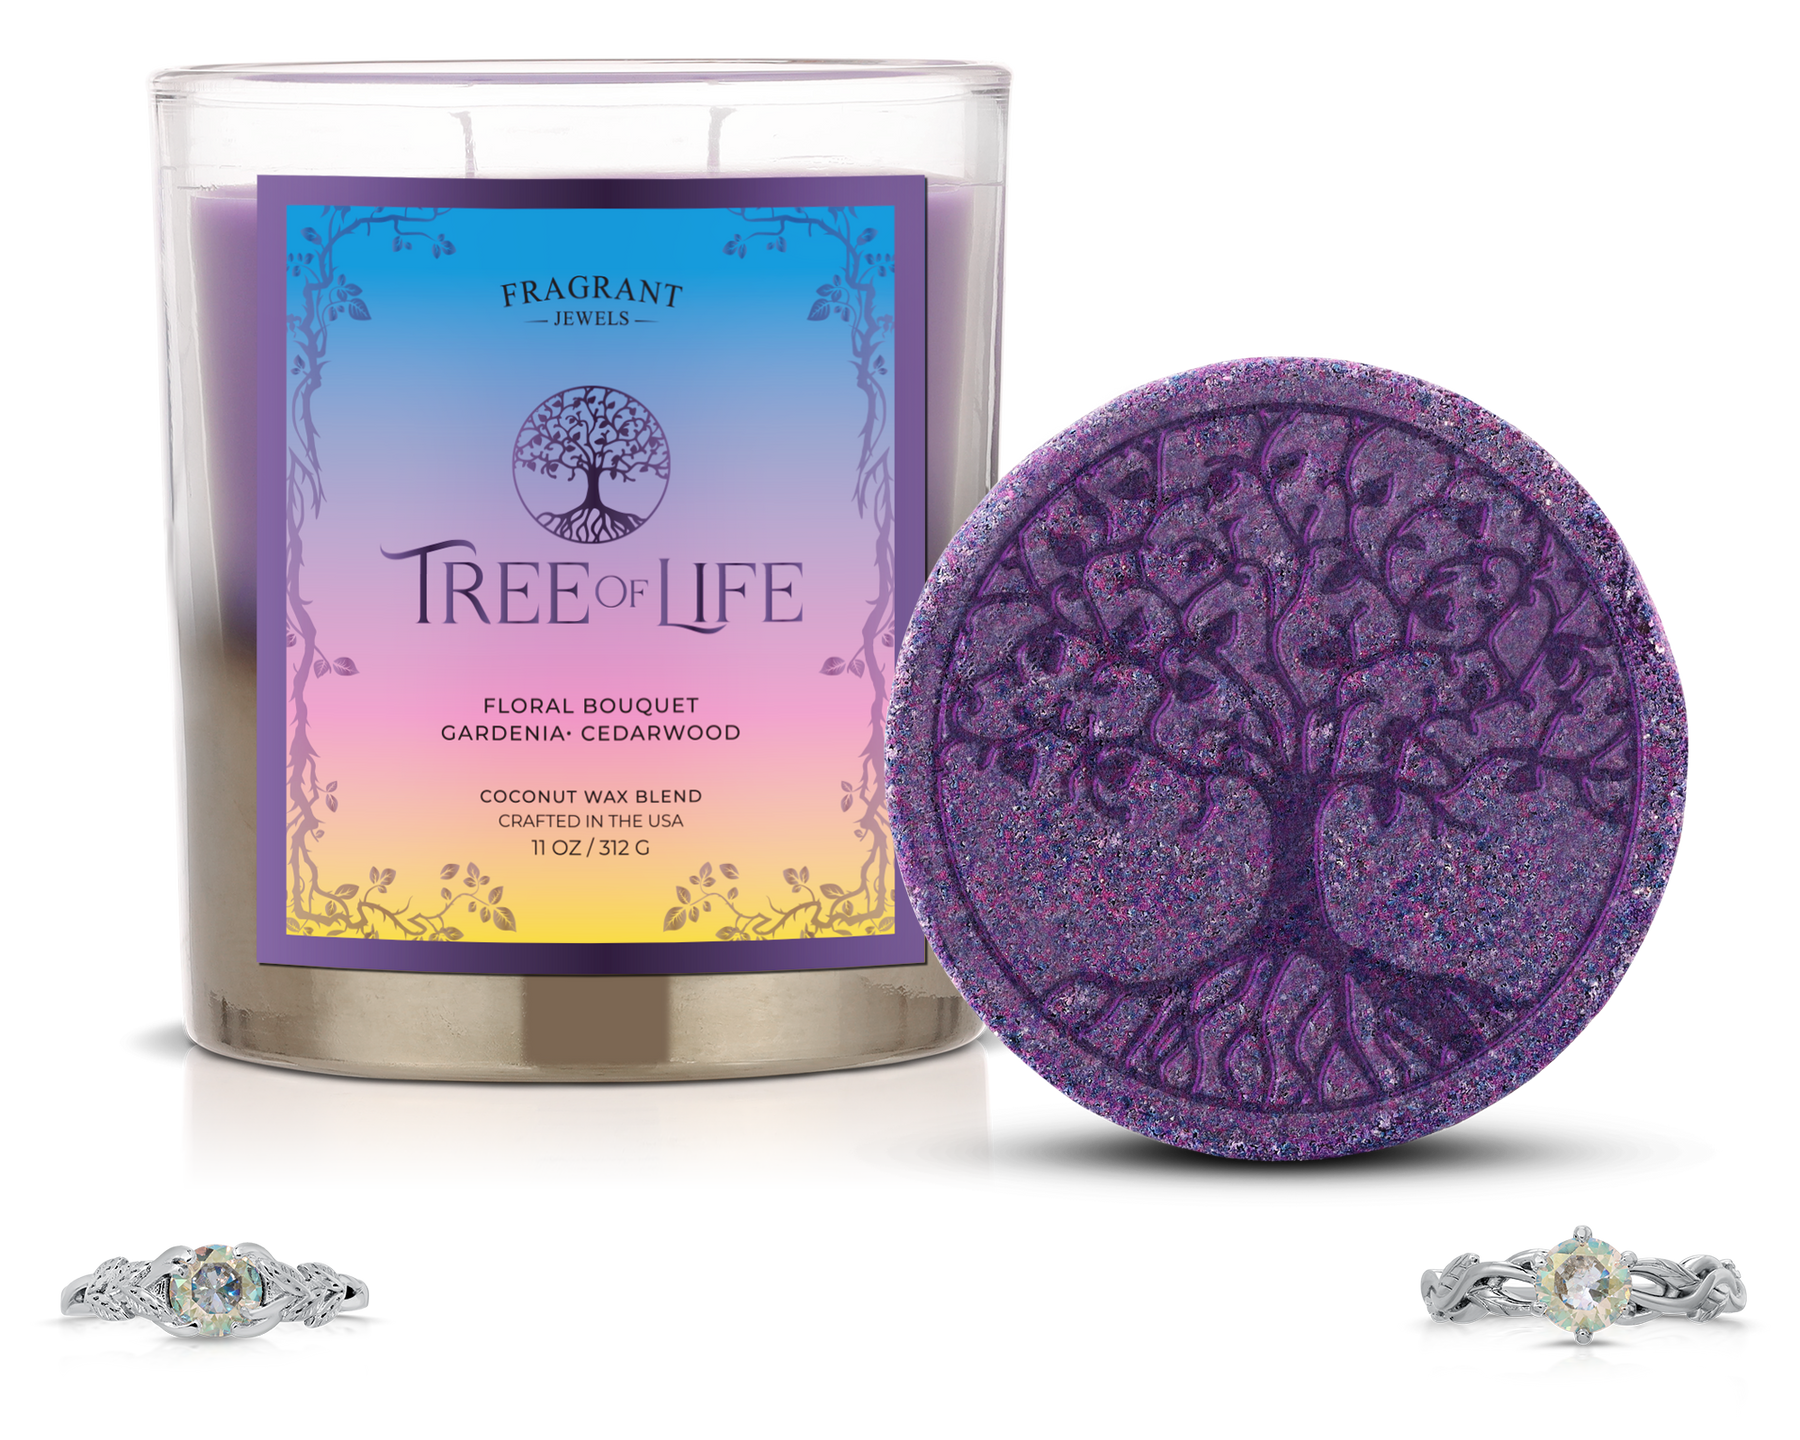 The May Monthly Box - Magical Story - Tree of Life